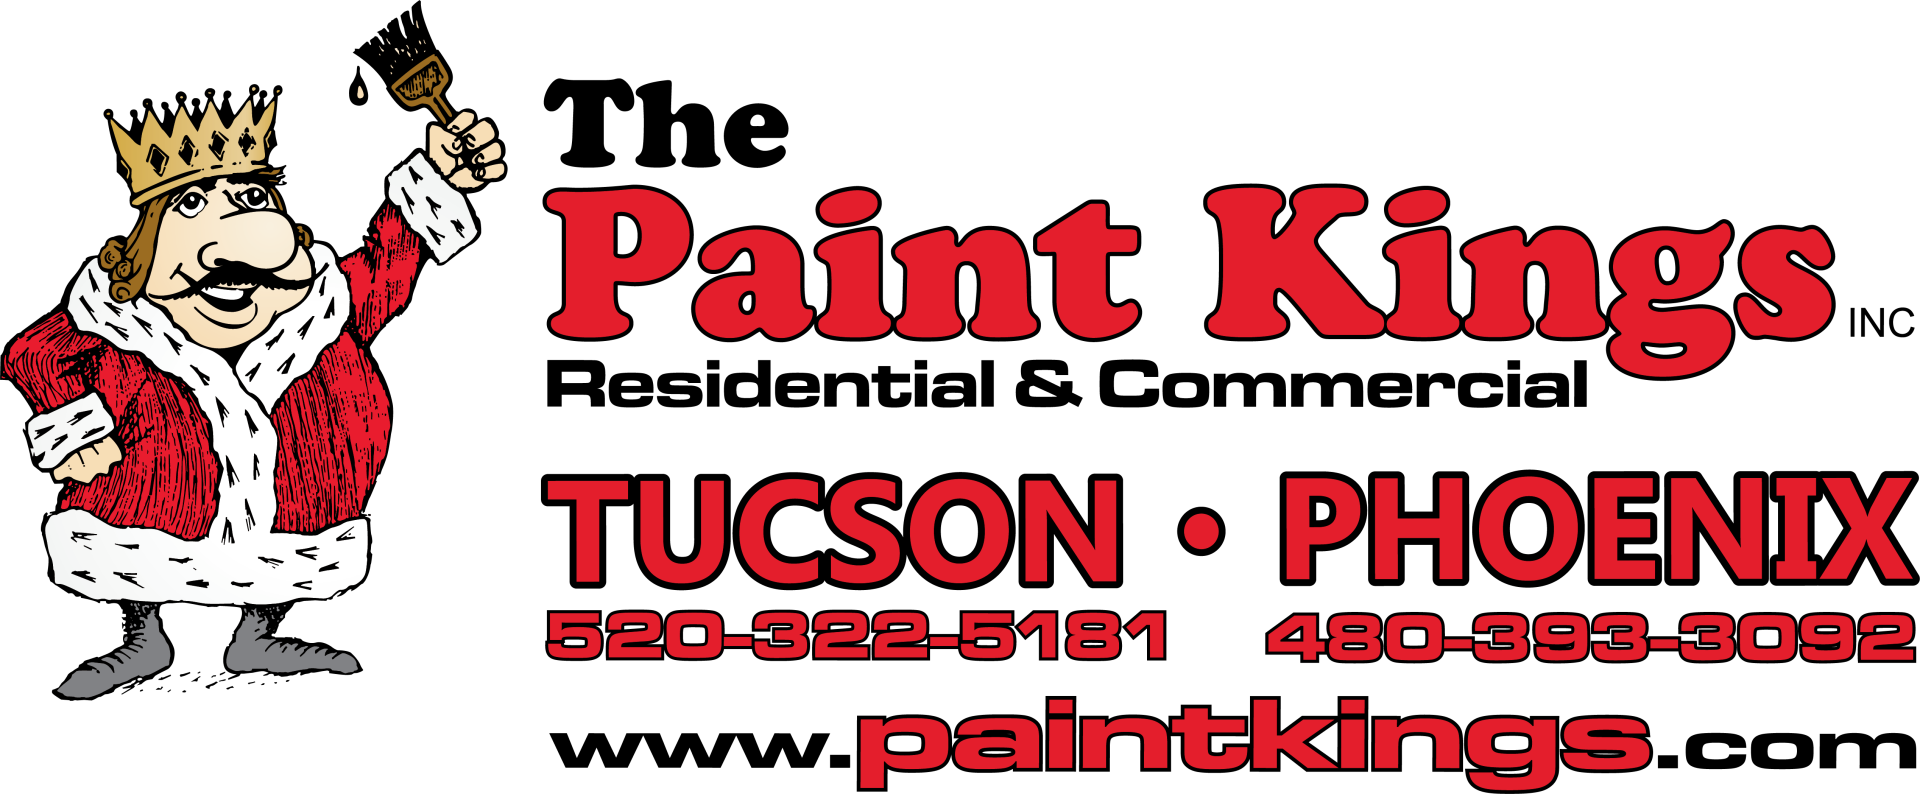 The Paint Kings Inc.